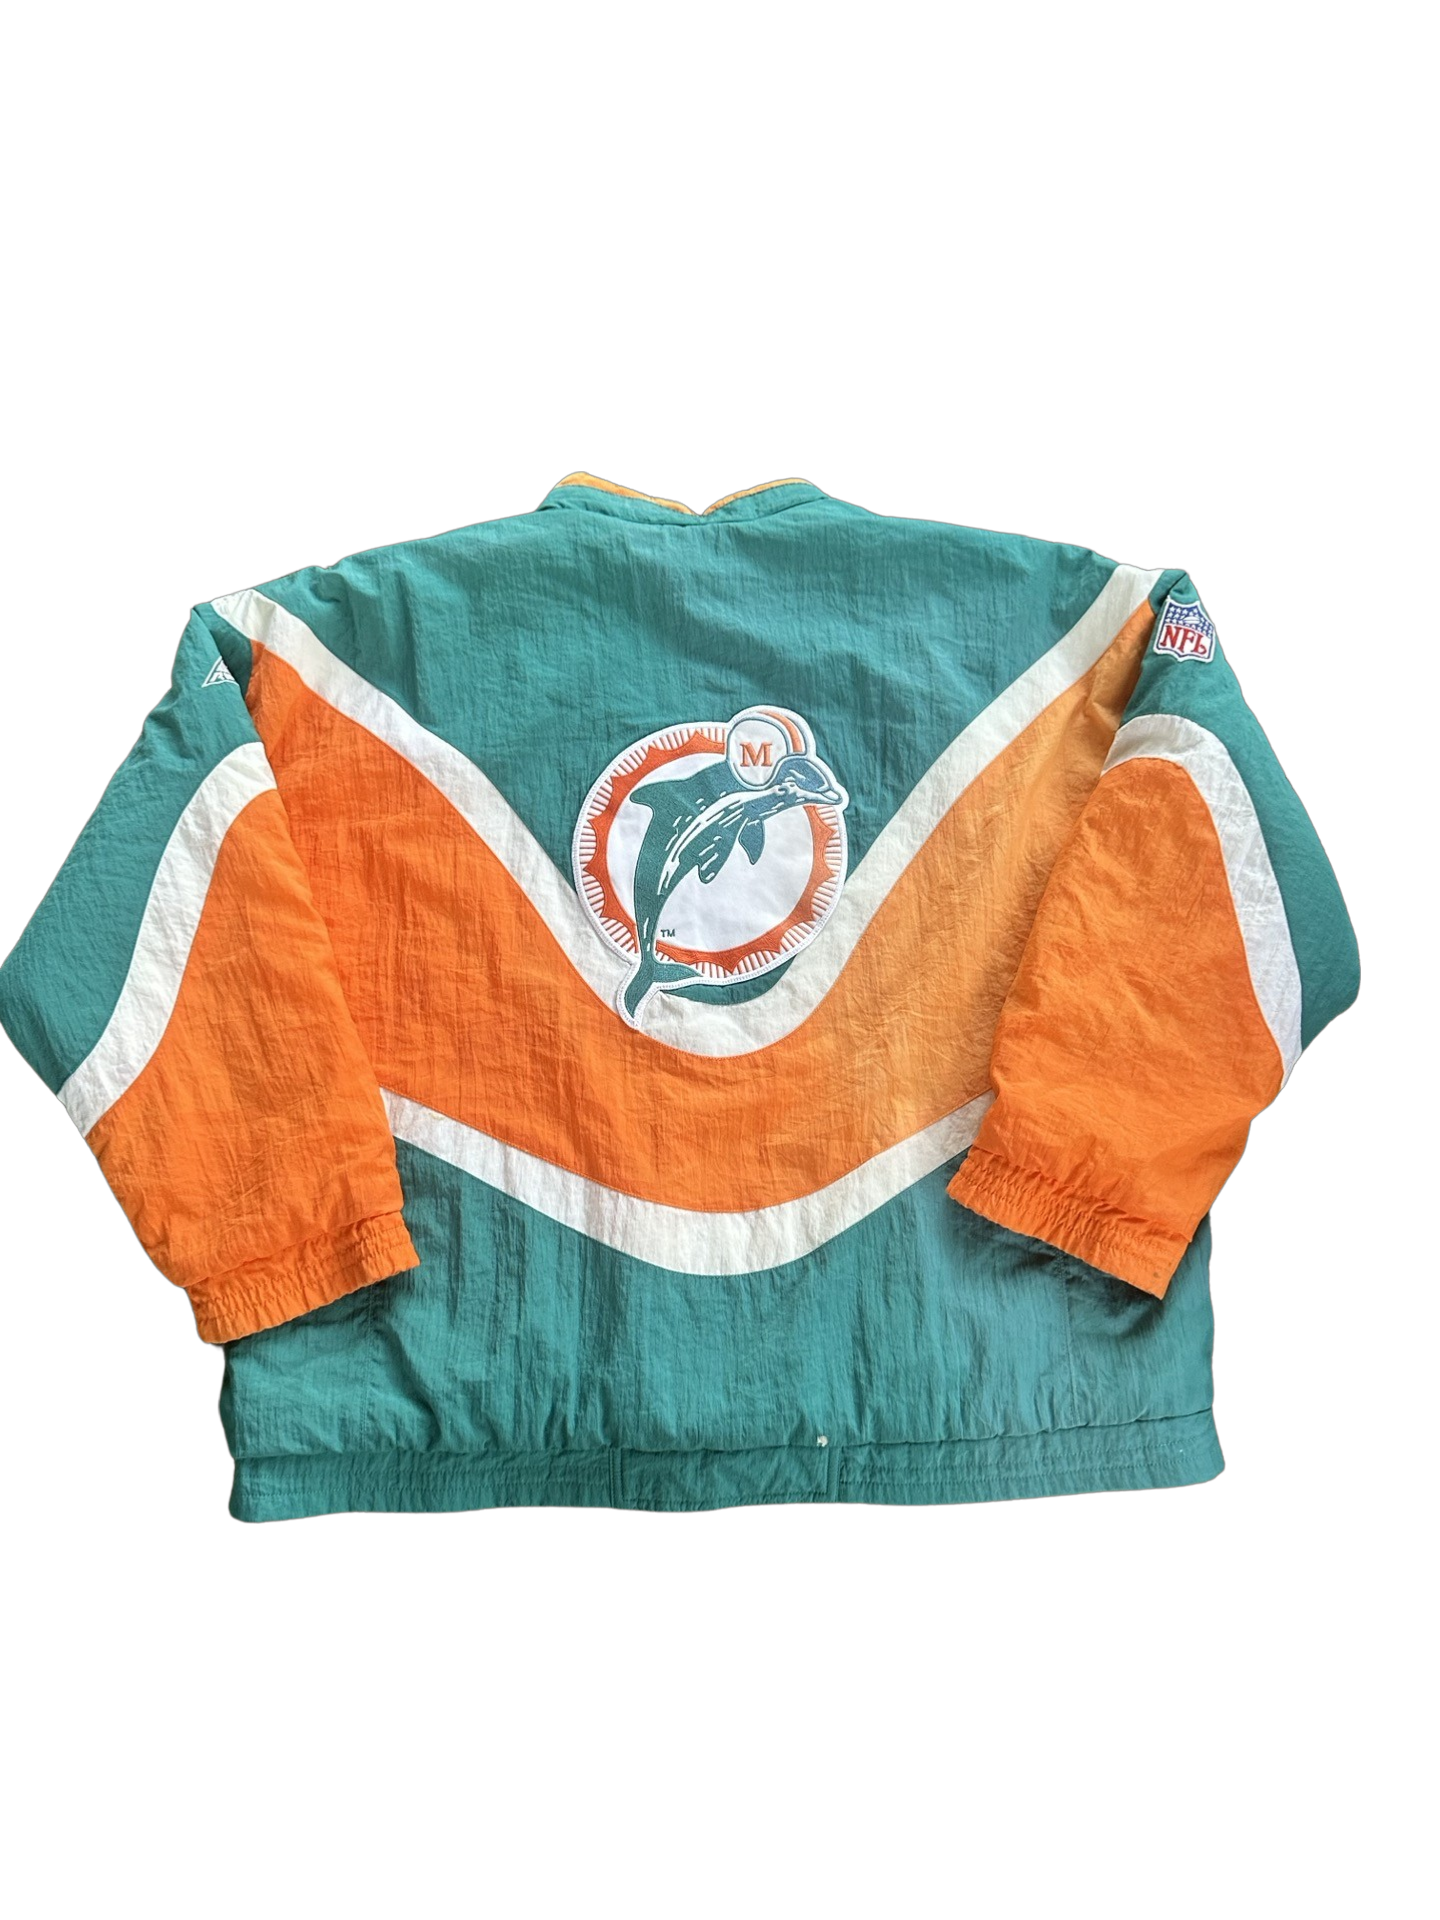 Vintage 90s Miami Dolphins Proline Puffer Jacket